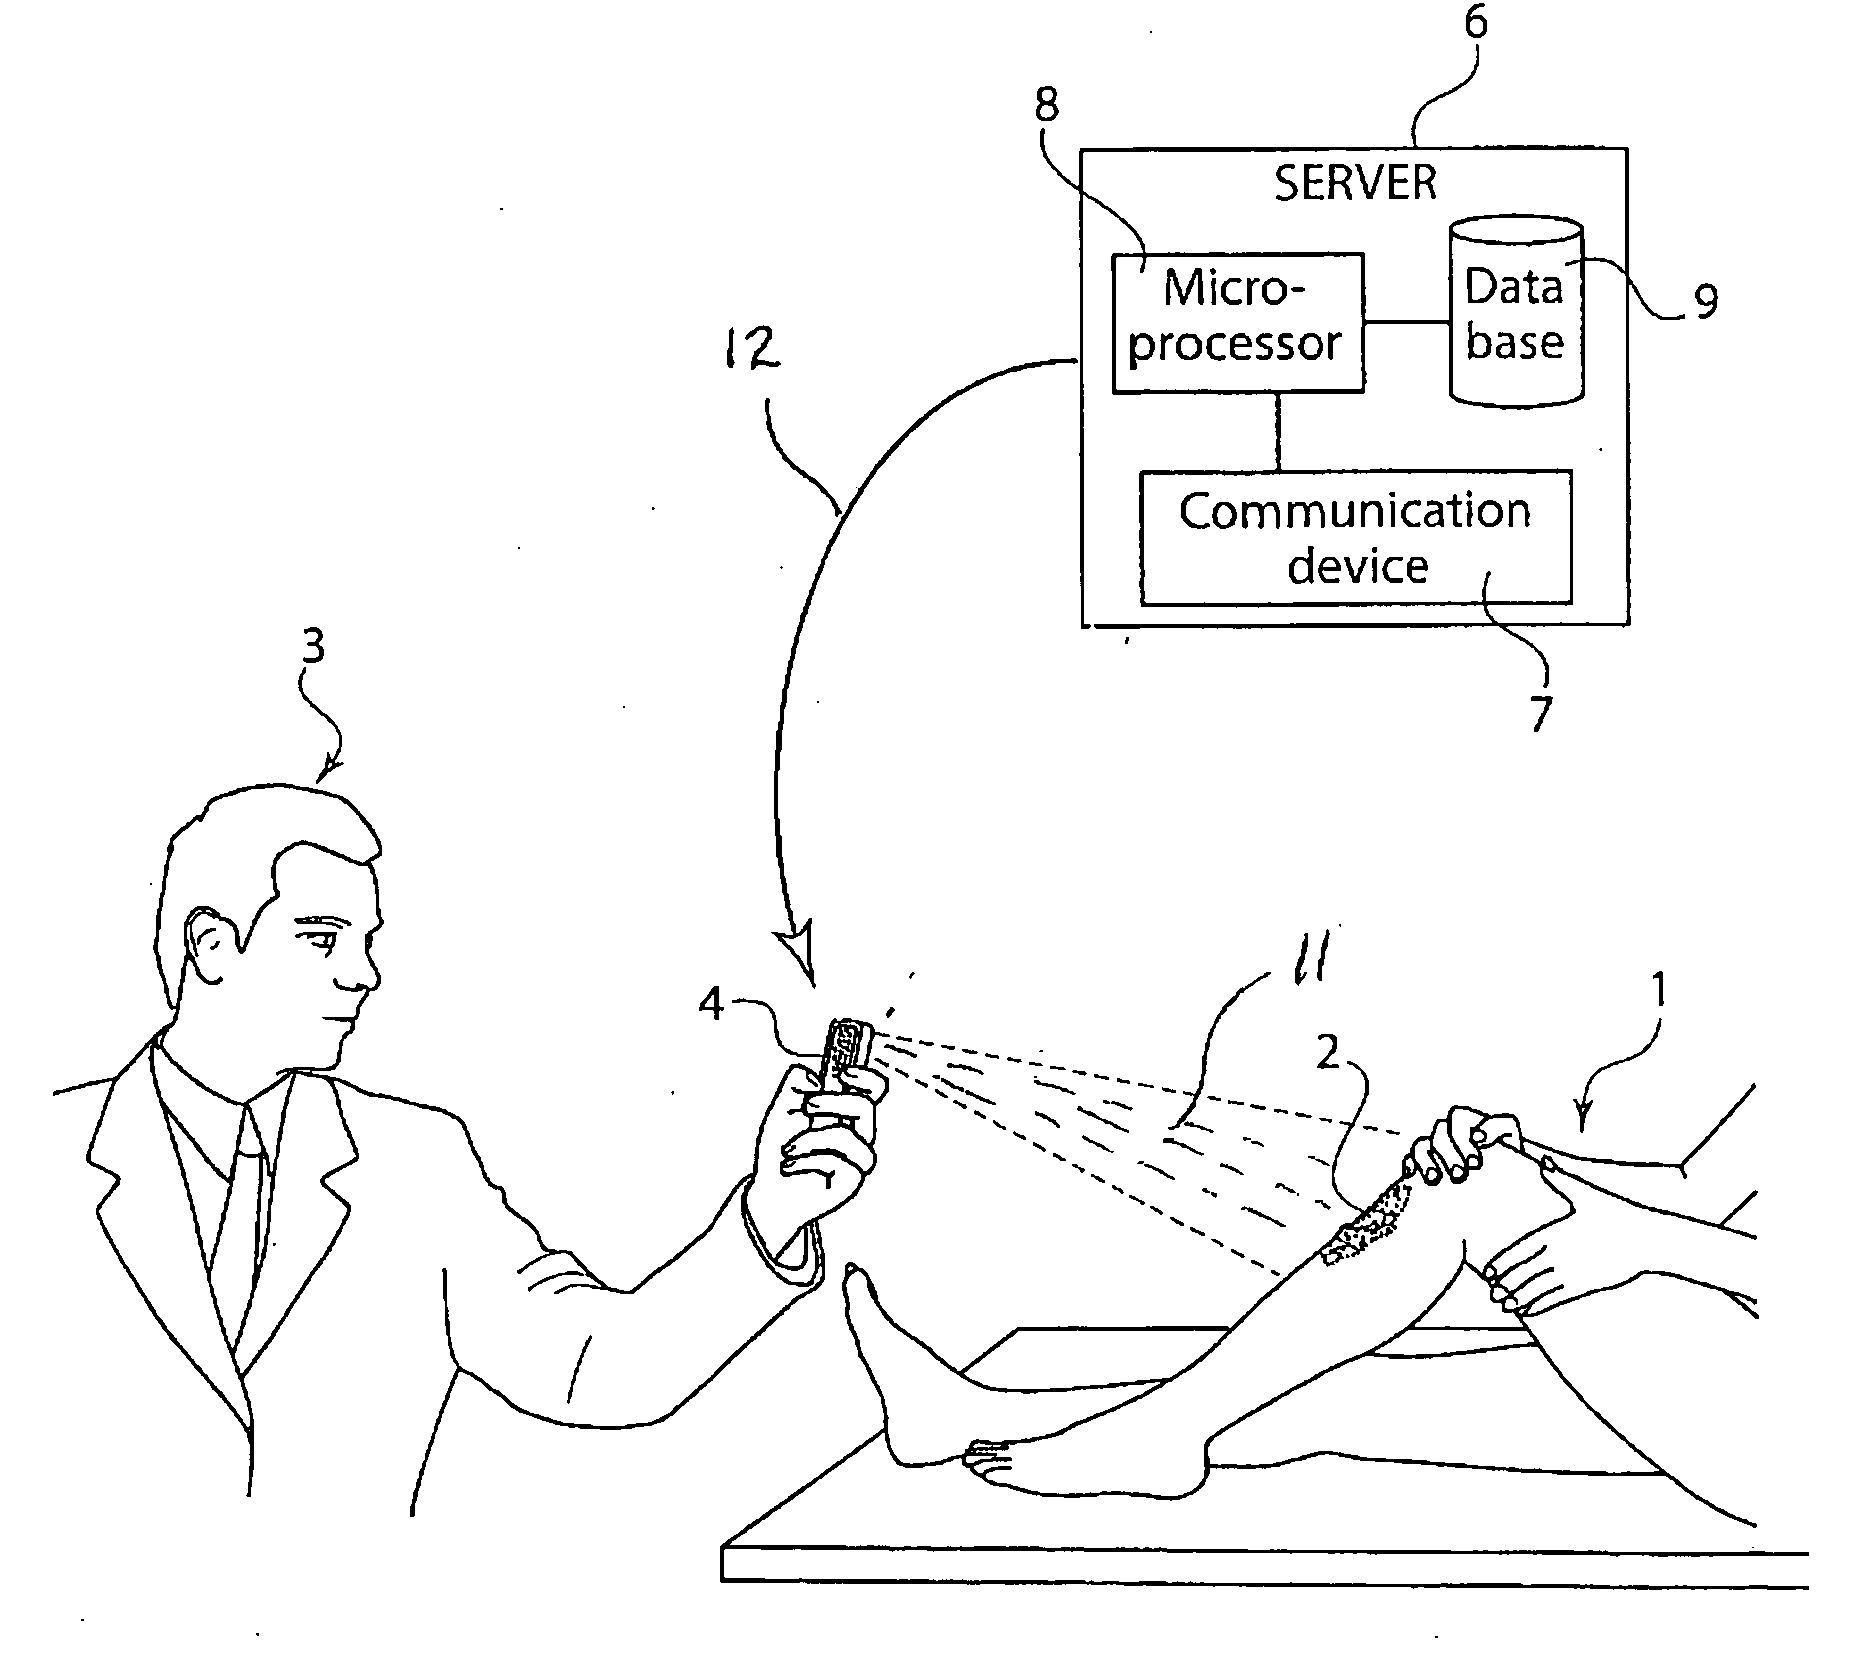 System and method for diagnosing and treating disease